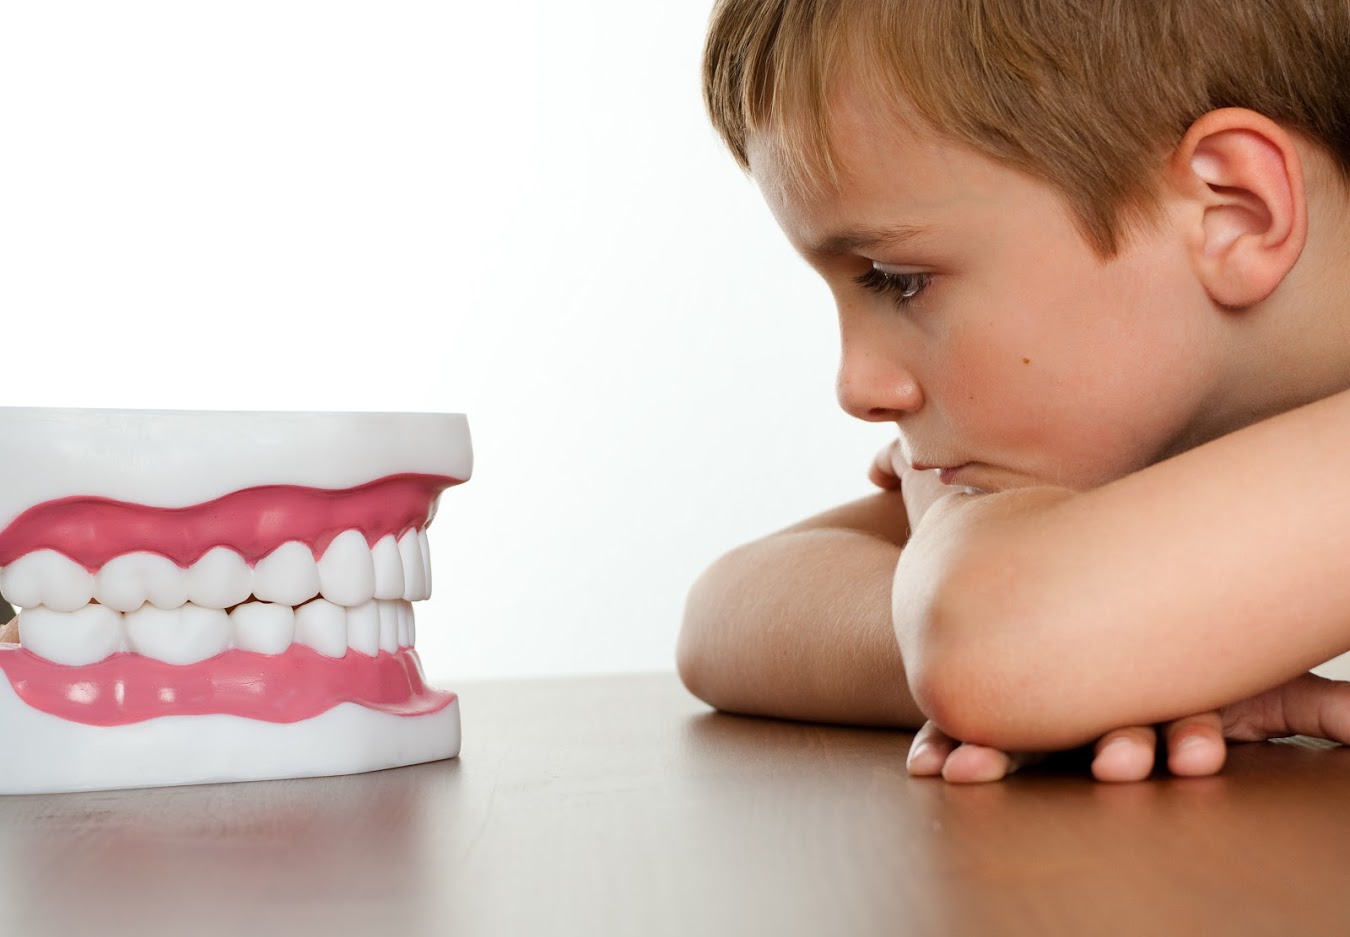 This is the image for the news article titled Pediatric Bruxism: Causes, Signs, and Treatment